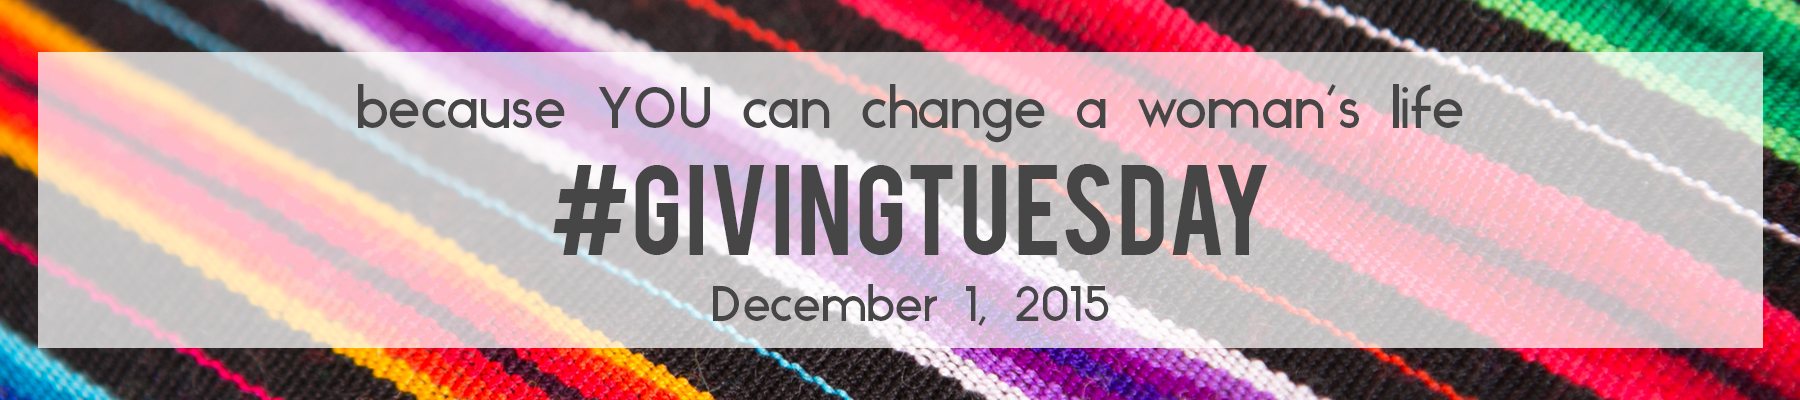 Giving Tuesday Banner_RM